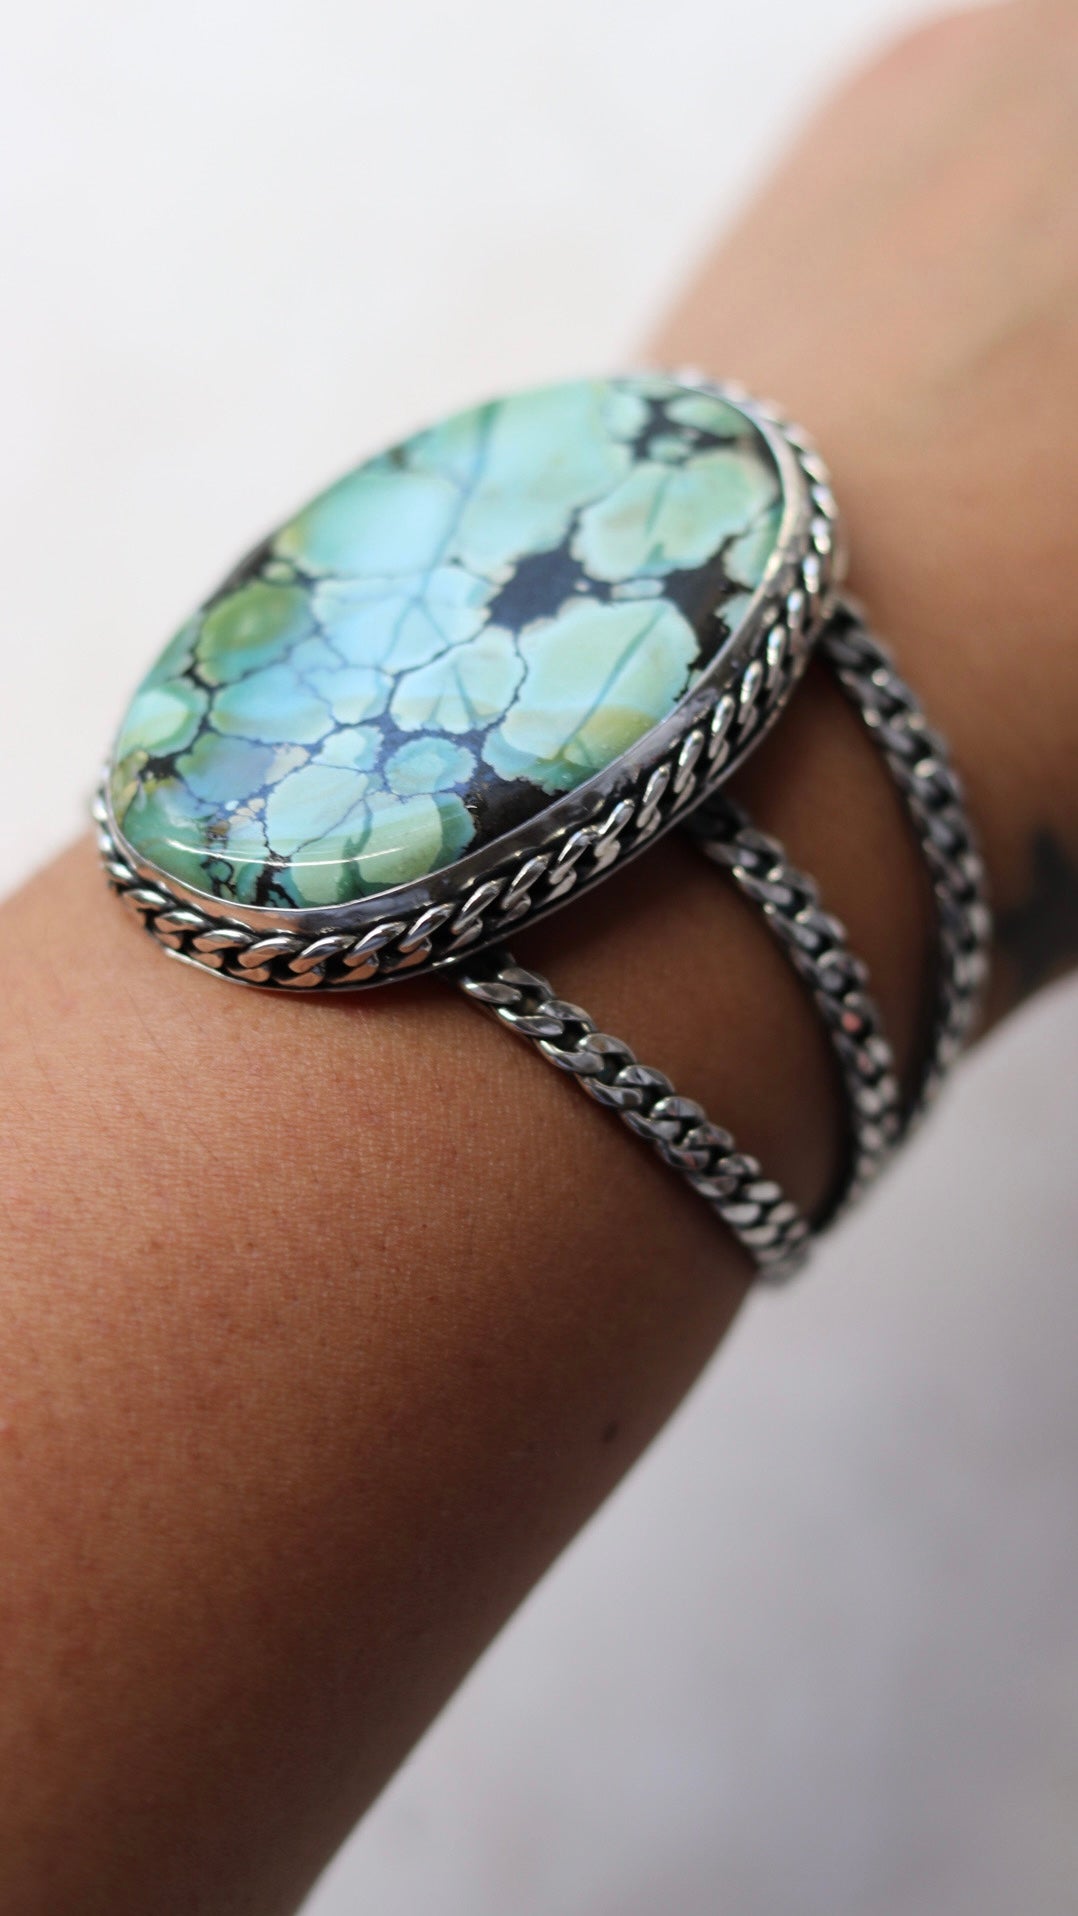 Giant turquoise Cuff